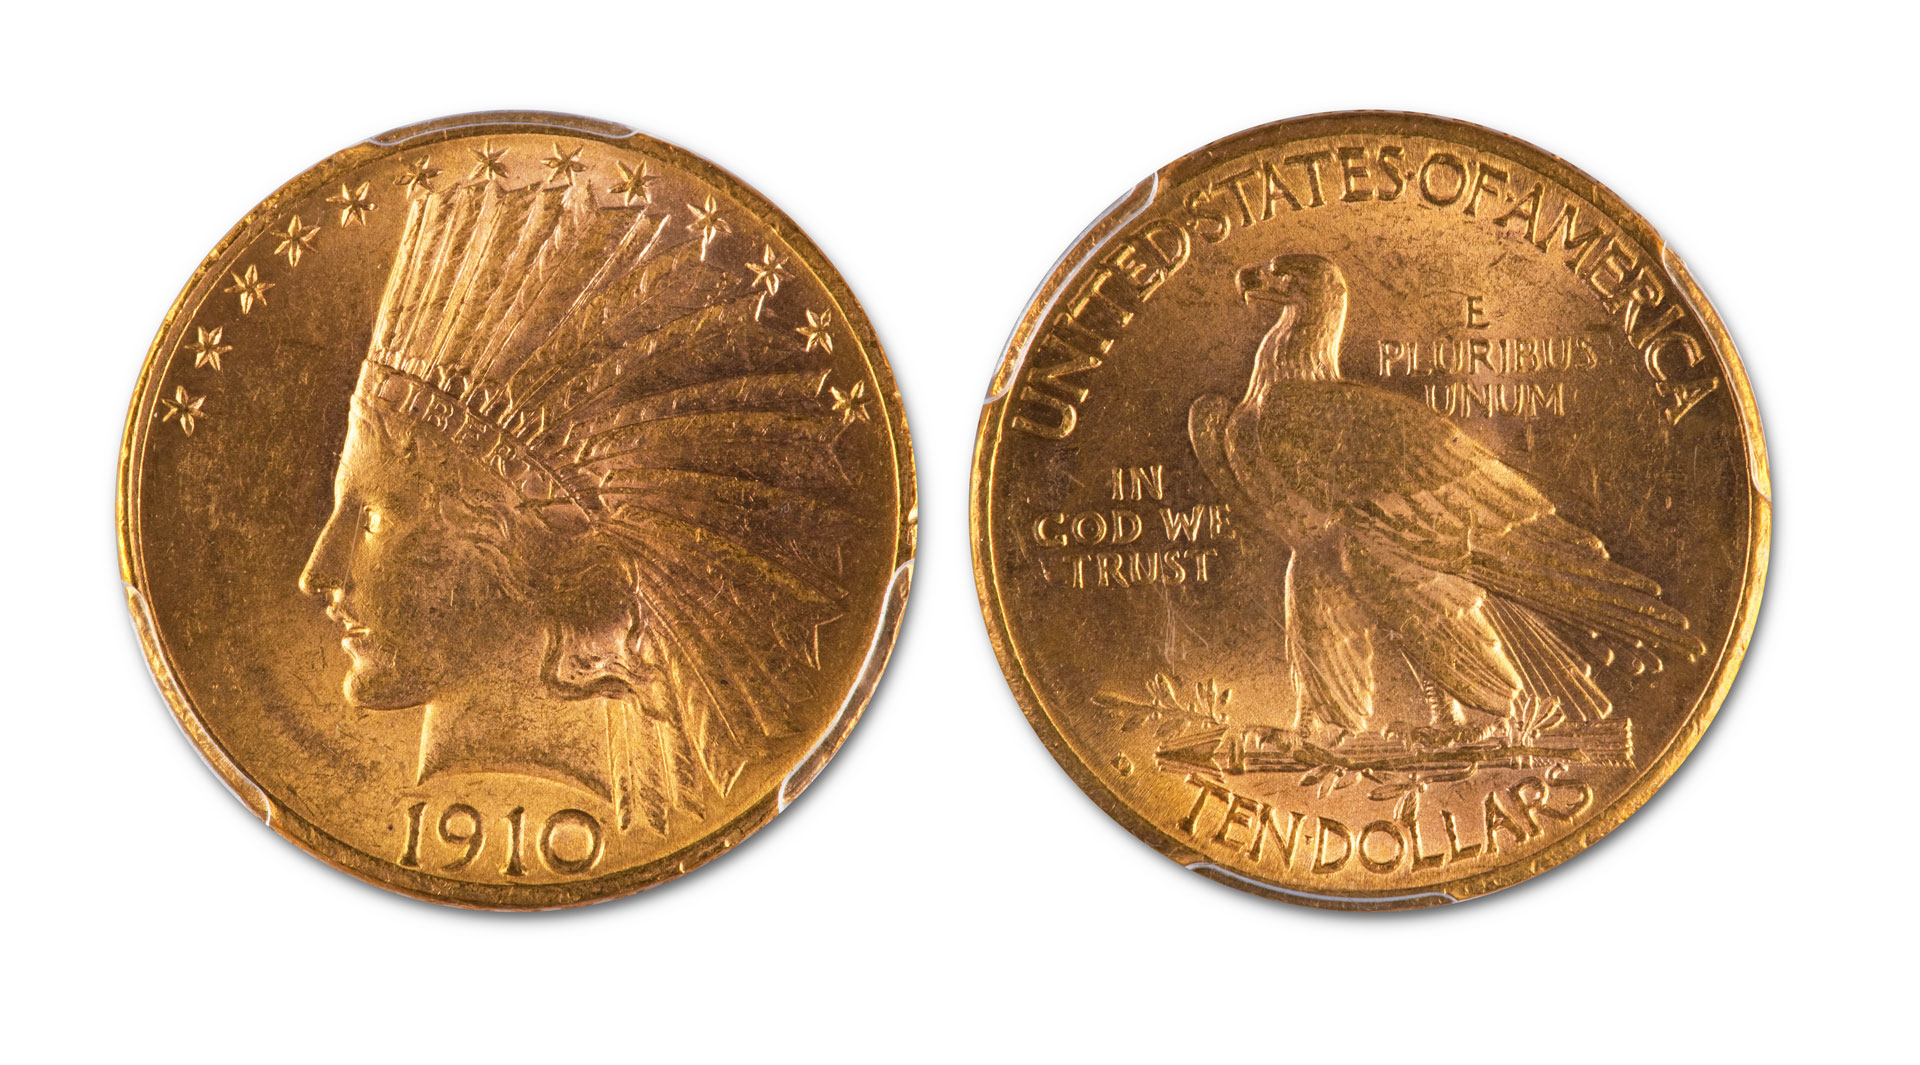 United States gold coins from 1910, front and back